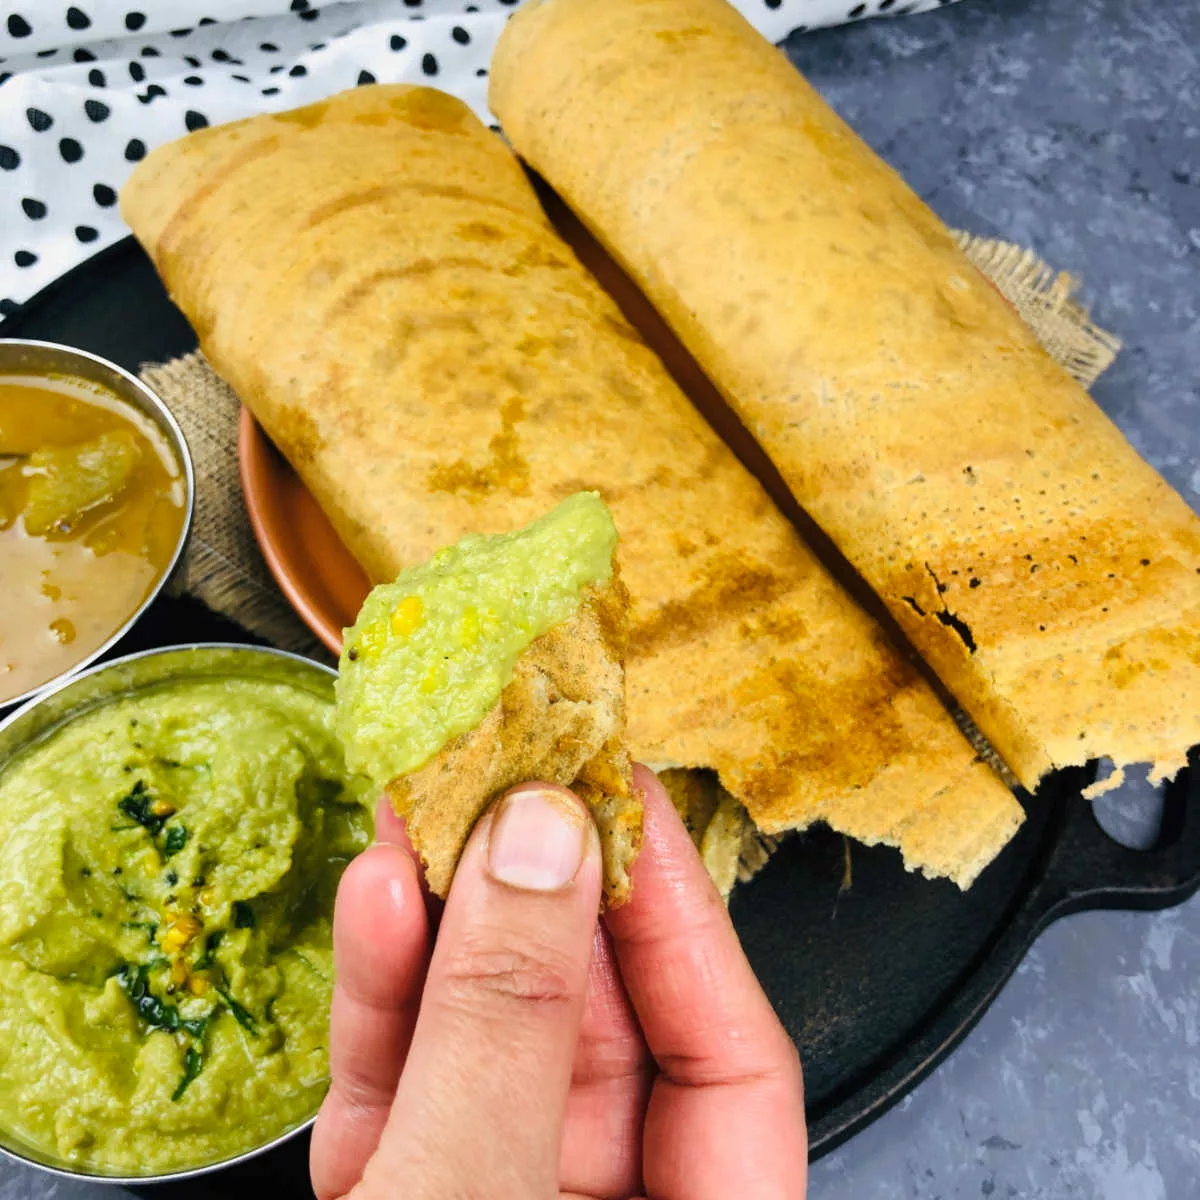 Millet dosa served with chutney.